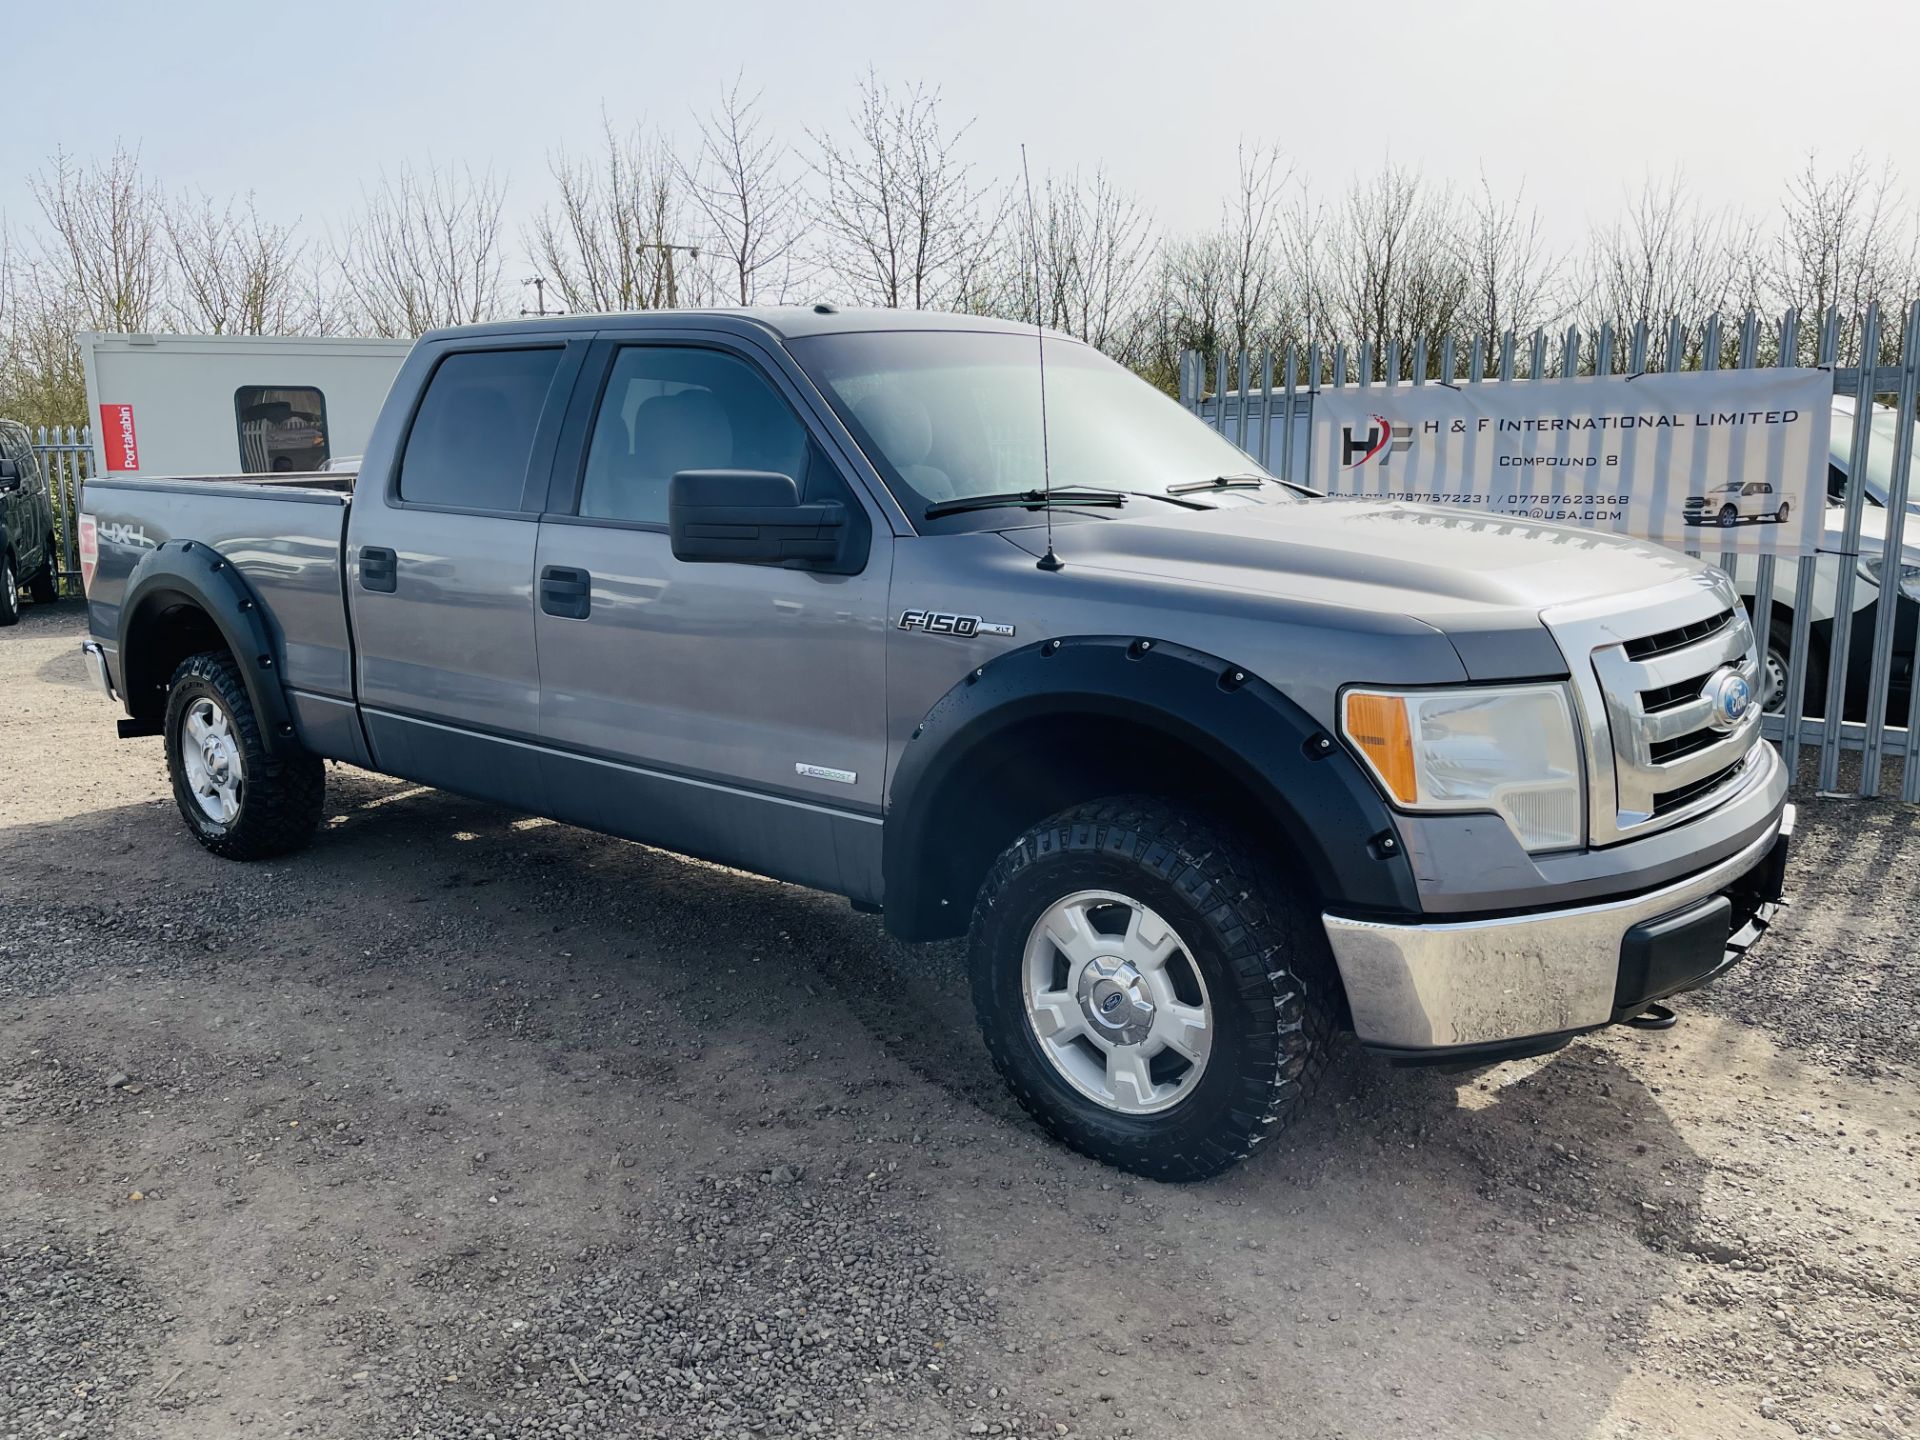 ** ON SALE **Ford F-150 XLT Edition 3.5L V6 Eco-boost Super-Crew 4x4 - '2012 Year' - Air Con -